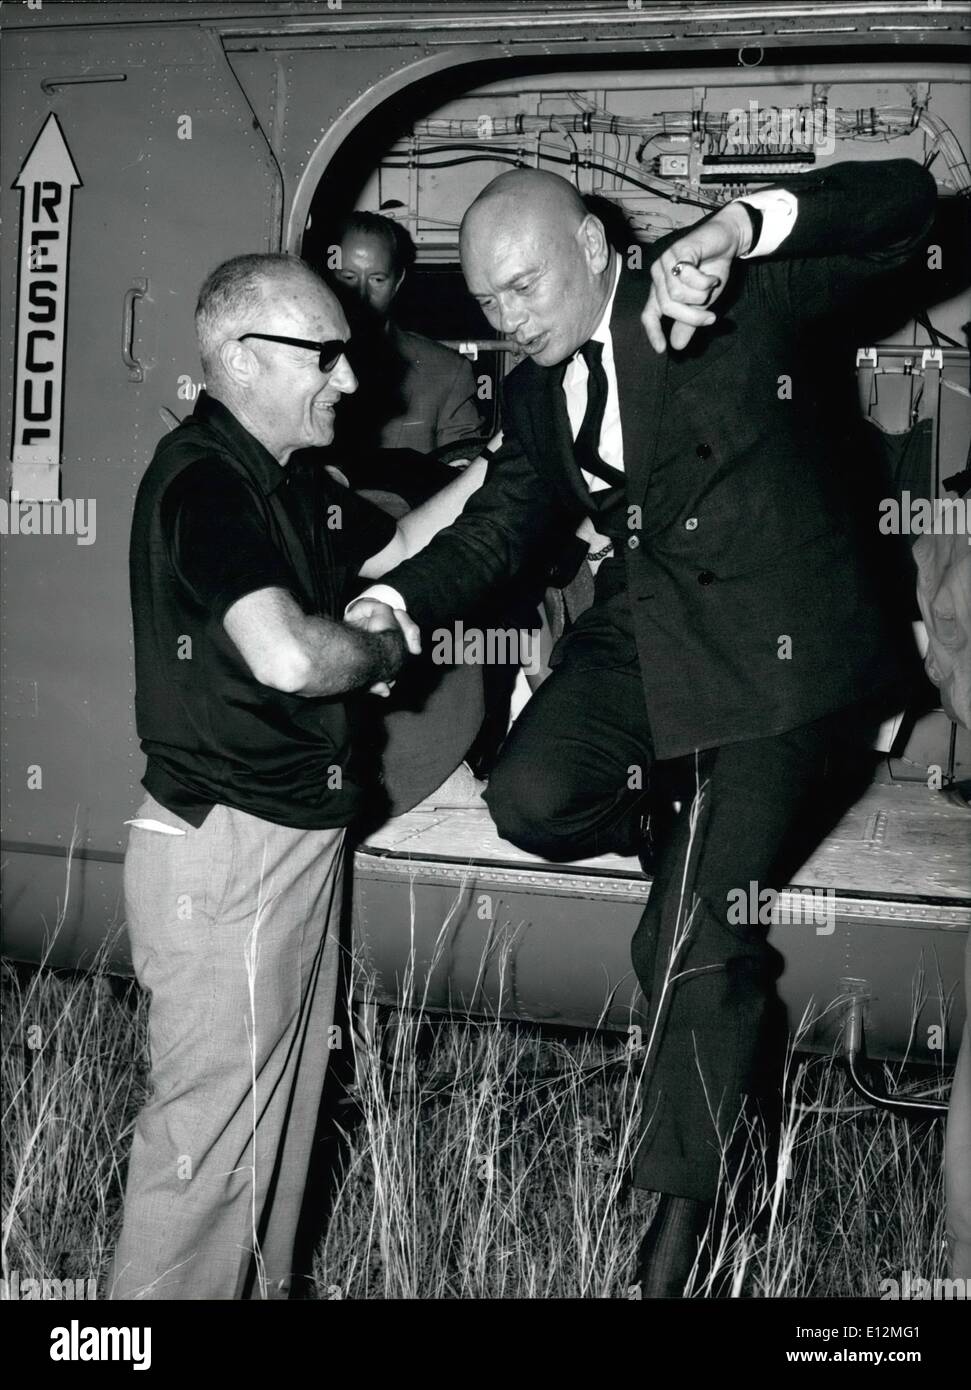 Feb. 24, 2012 - Rome, August 1966 - The film festival in Taormine, ended and the Prizes ''David Di Donatello'' were delivered to the actors. photo shows American actor Yul Brynner arrives at Taormine. Stock Photo